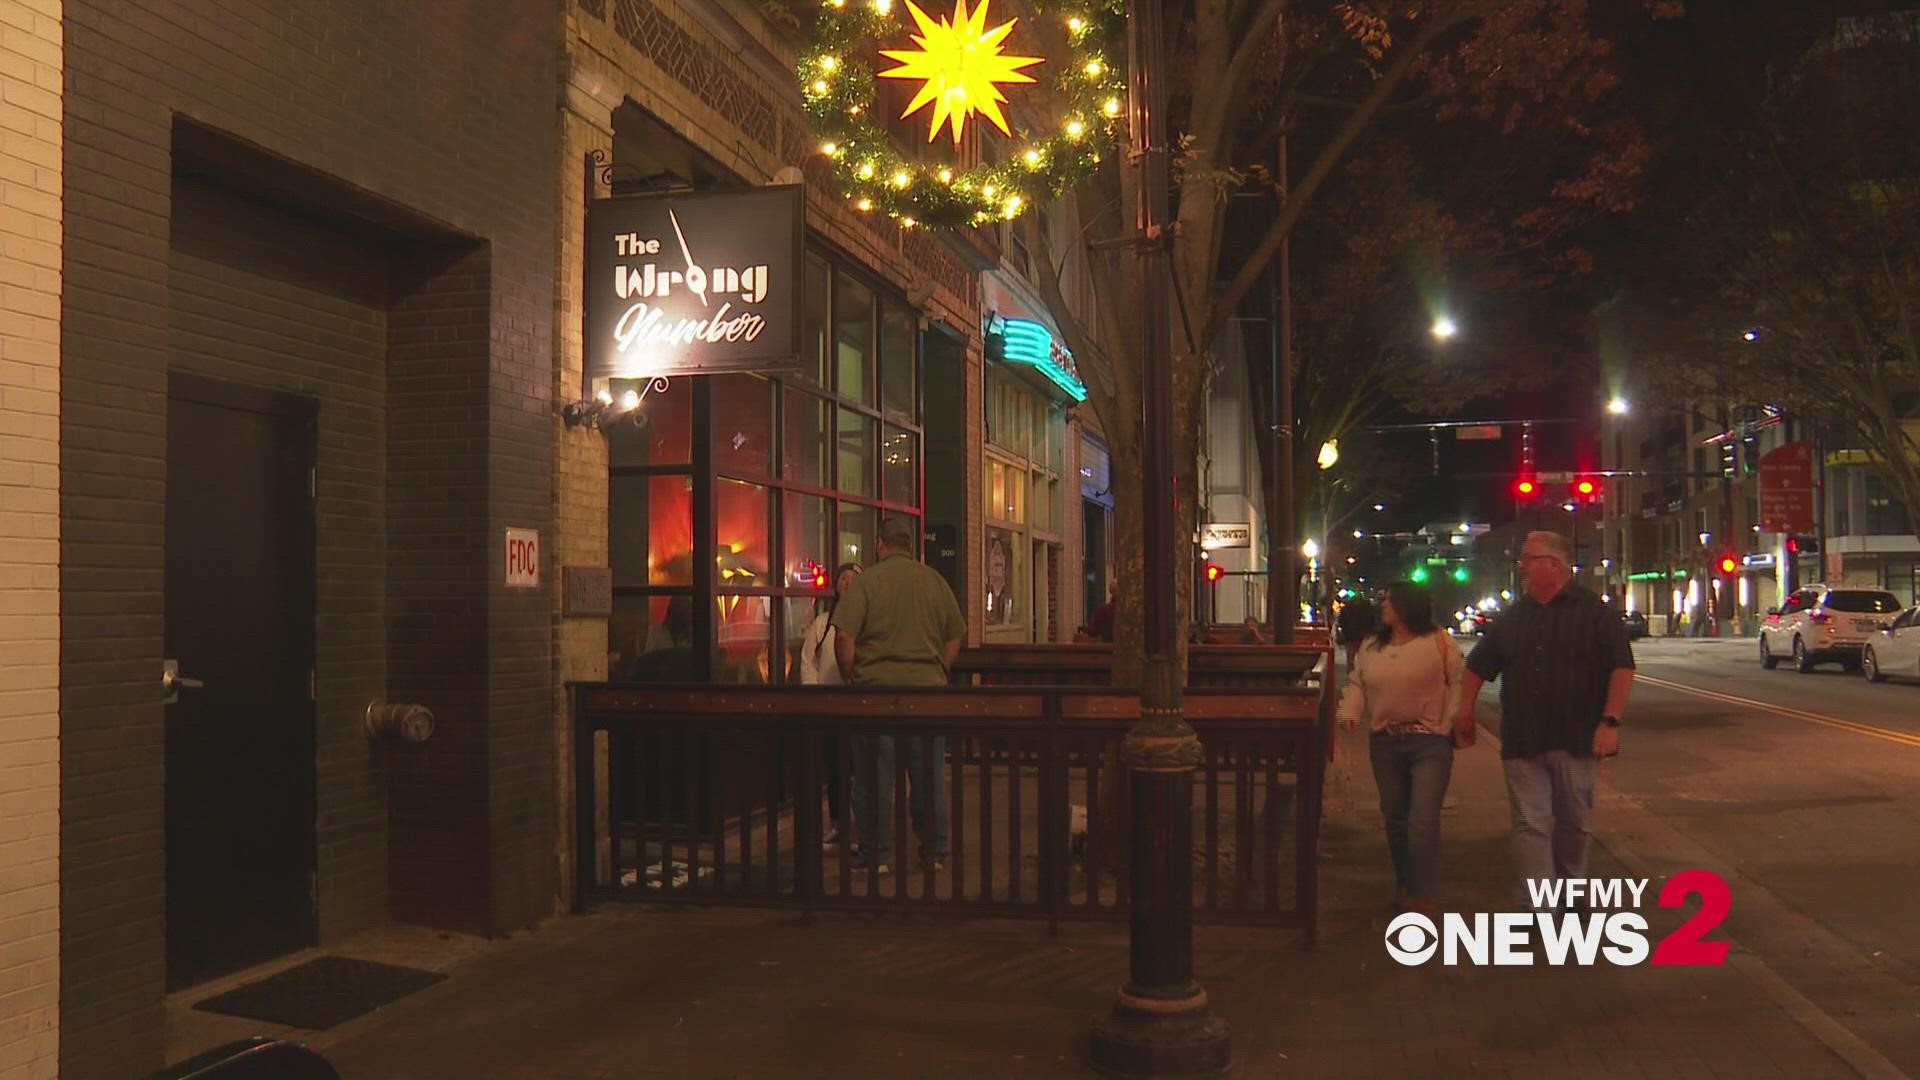 A Triad man cashed in on a headache. He used the money to open a bar where the old Bulls Tavern used to be.